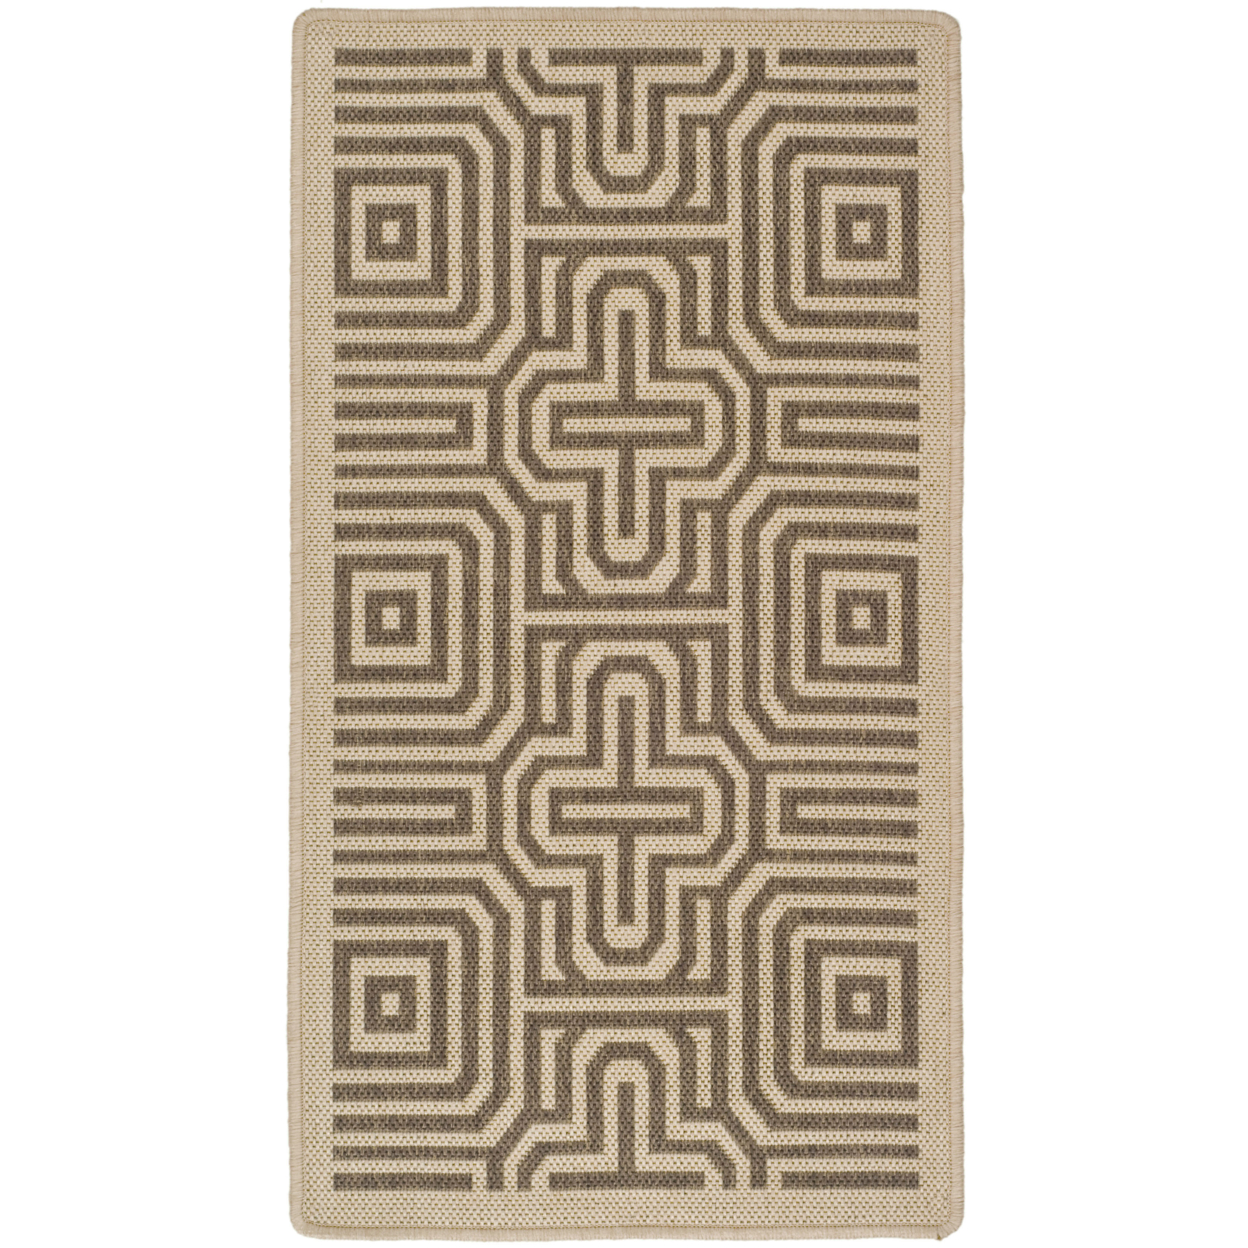 SAFAVIEH Outdoor CY2962-3001 Courtyard Natural / Brown Rug - 4' X 5' 7